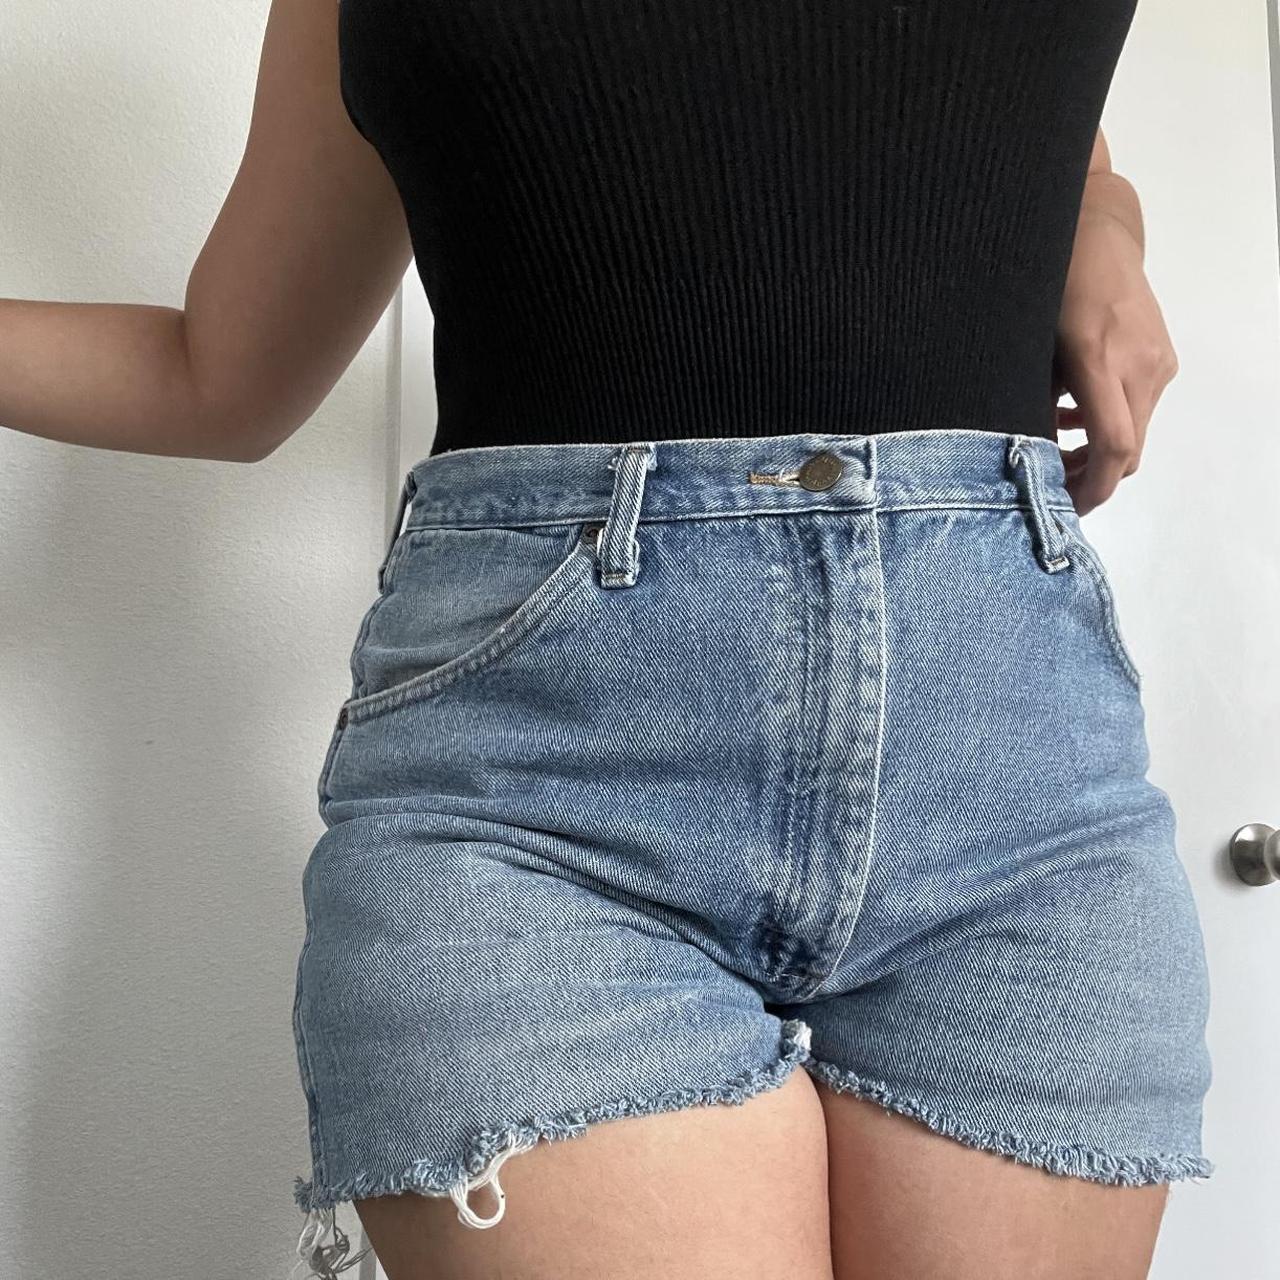 Wrangler cut off distressed shorts The perfect... - Depop